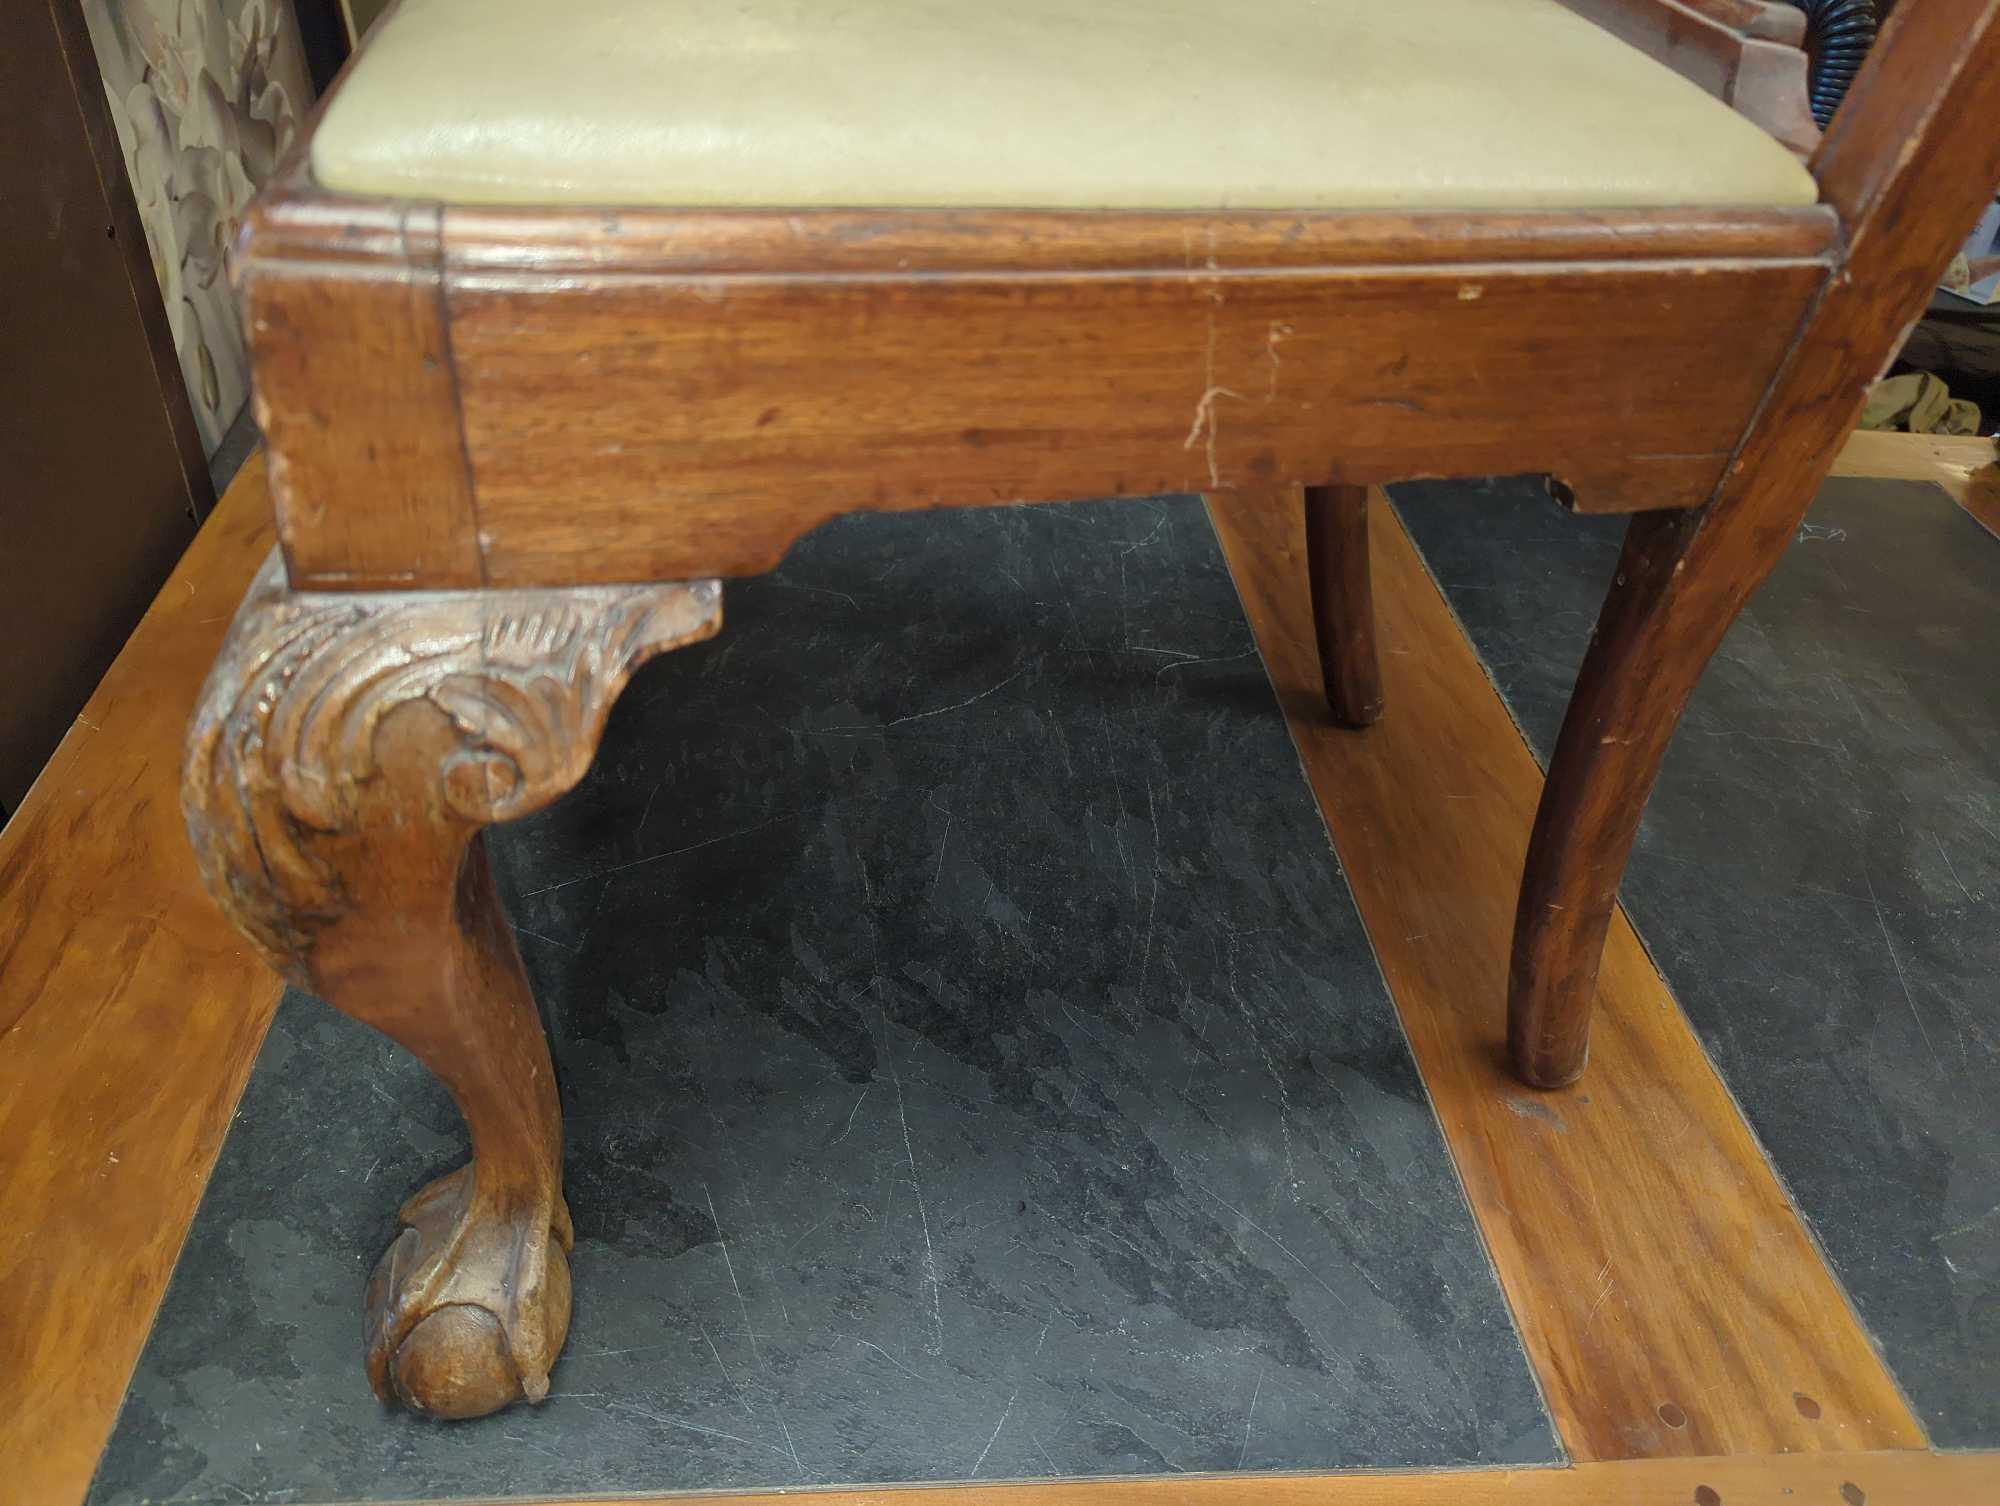 19th Century Centenial Chipendale Mahogany Side Chair, Back Of Chair has a Piece Missing, Legs Have